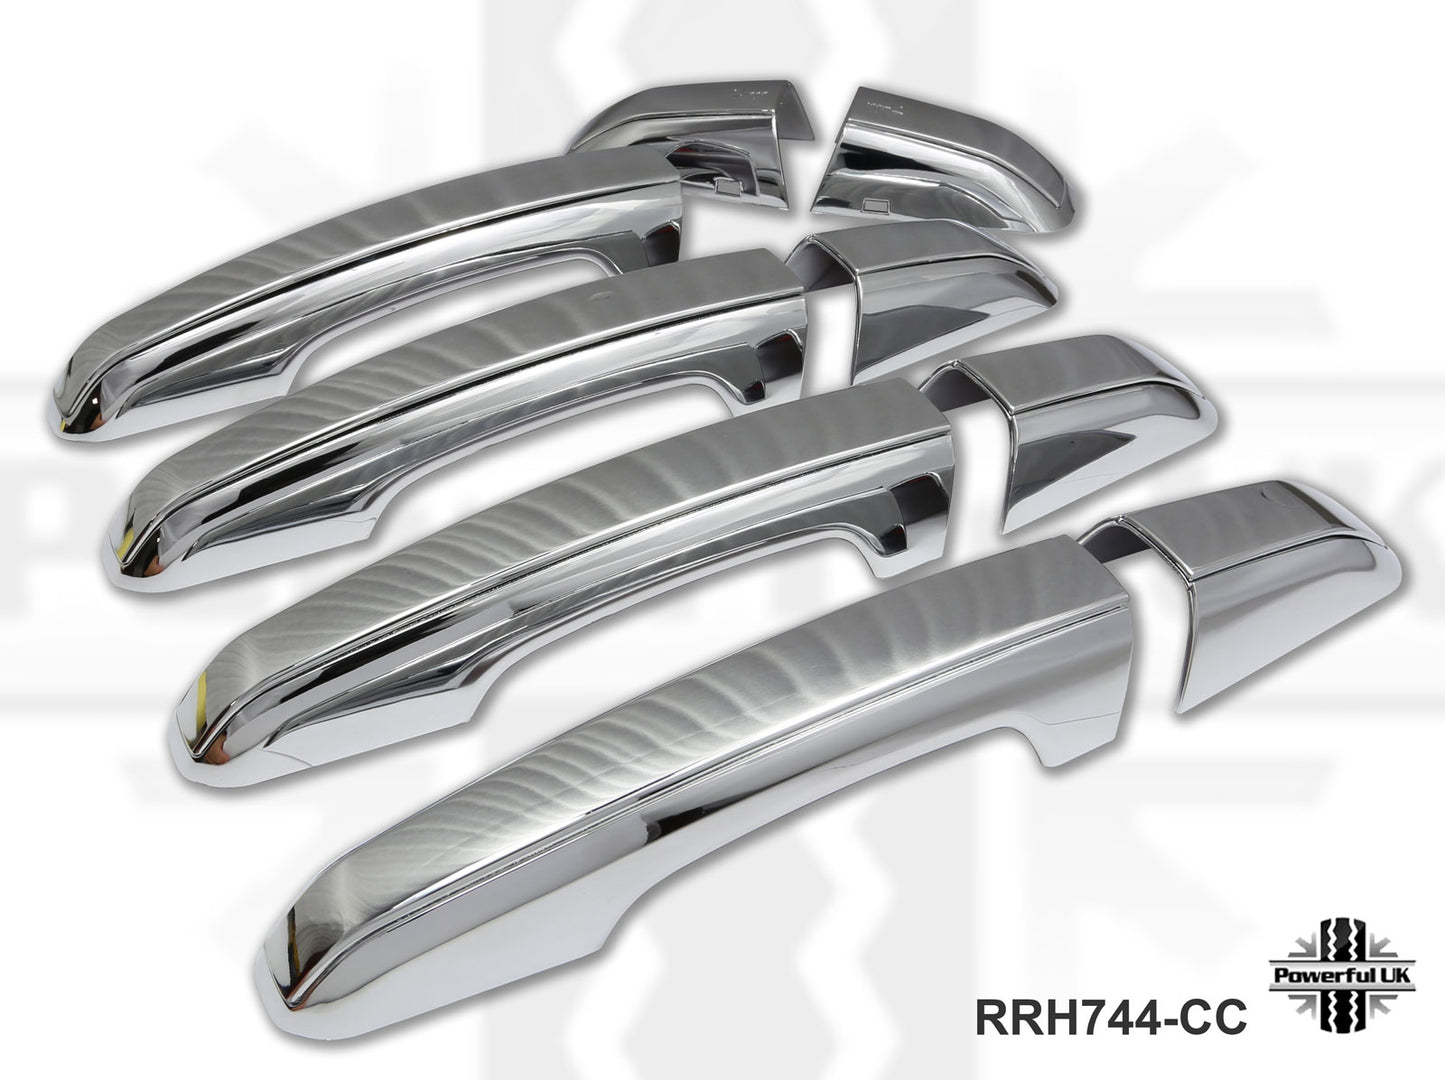 2pc "Autobiography Style" Door Handle Covers for Range Rover Evoque L538 - Chrome/Chrome